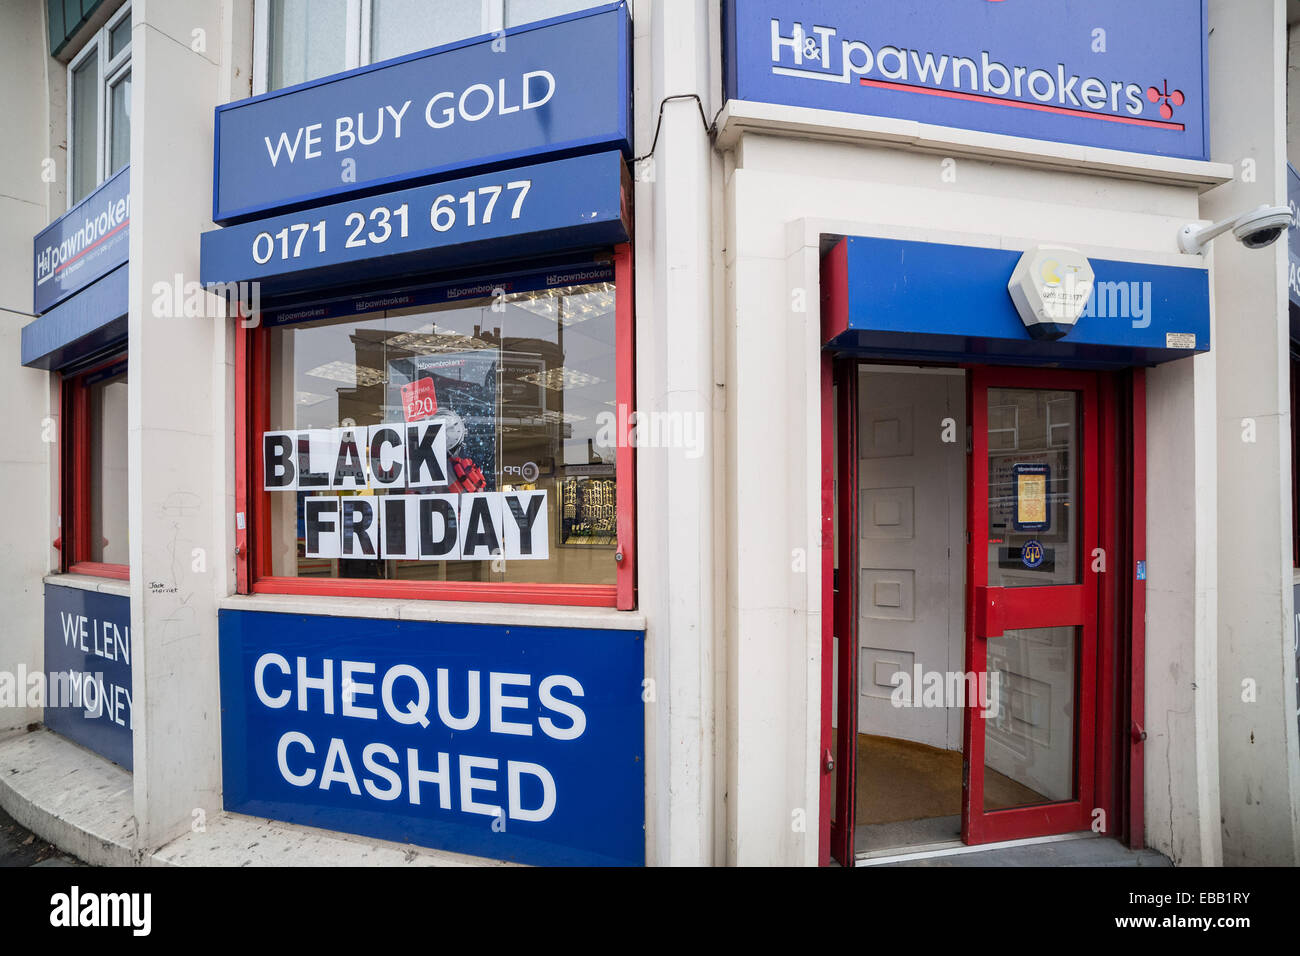 Black Friday sale at a Pawnbrokers in south east London, UK. Stock Photo